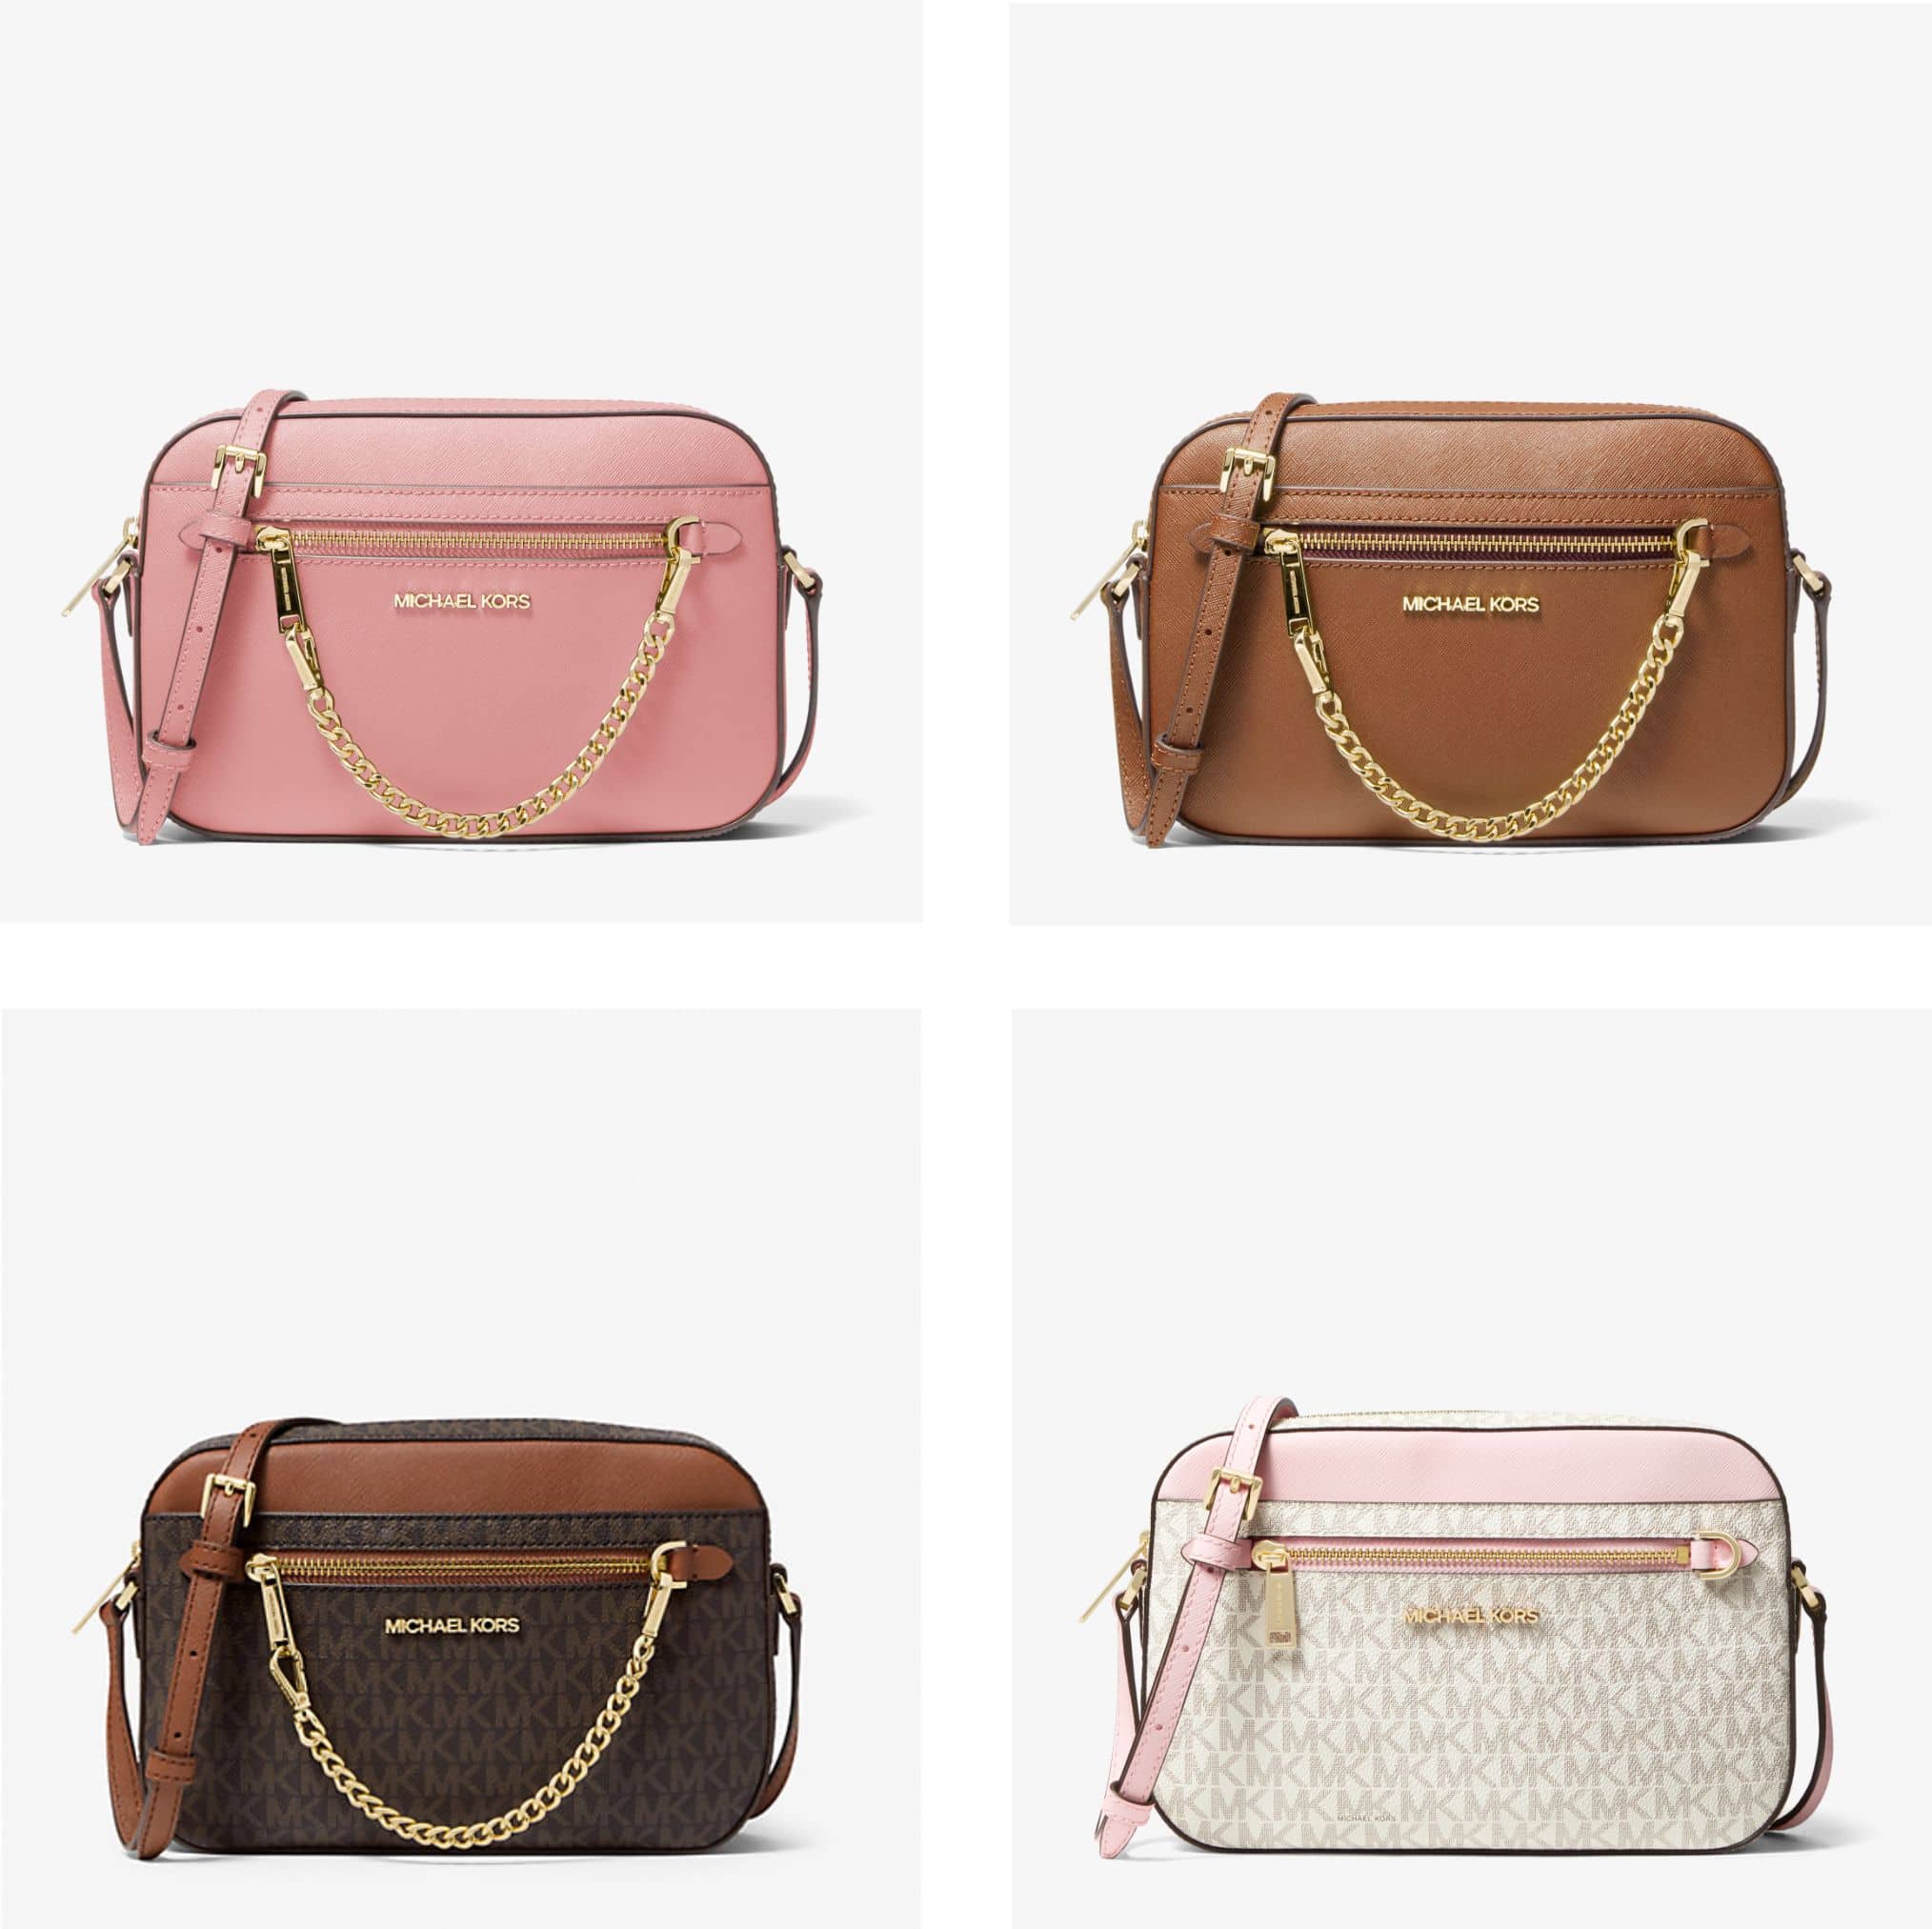 Shop Michael Kors Handbags From The USA  Here Is Why